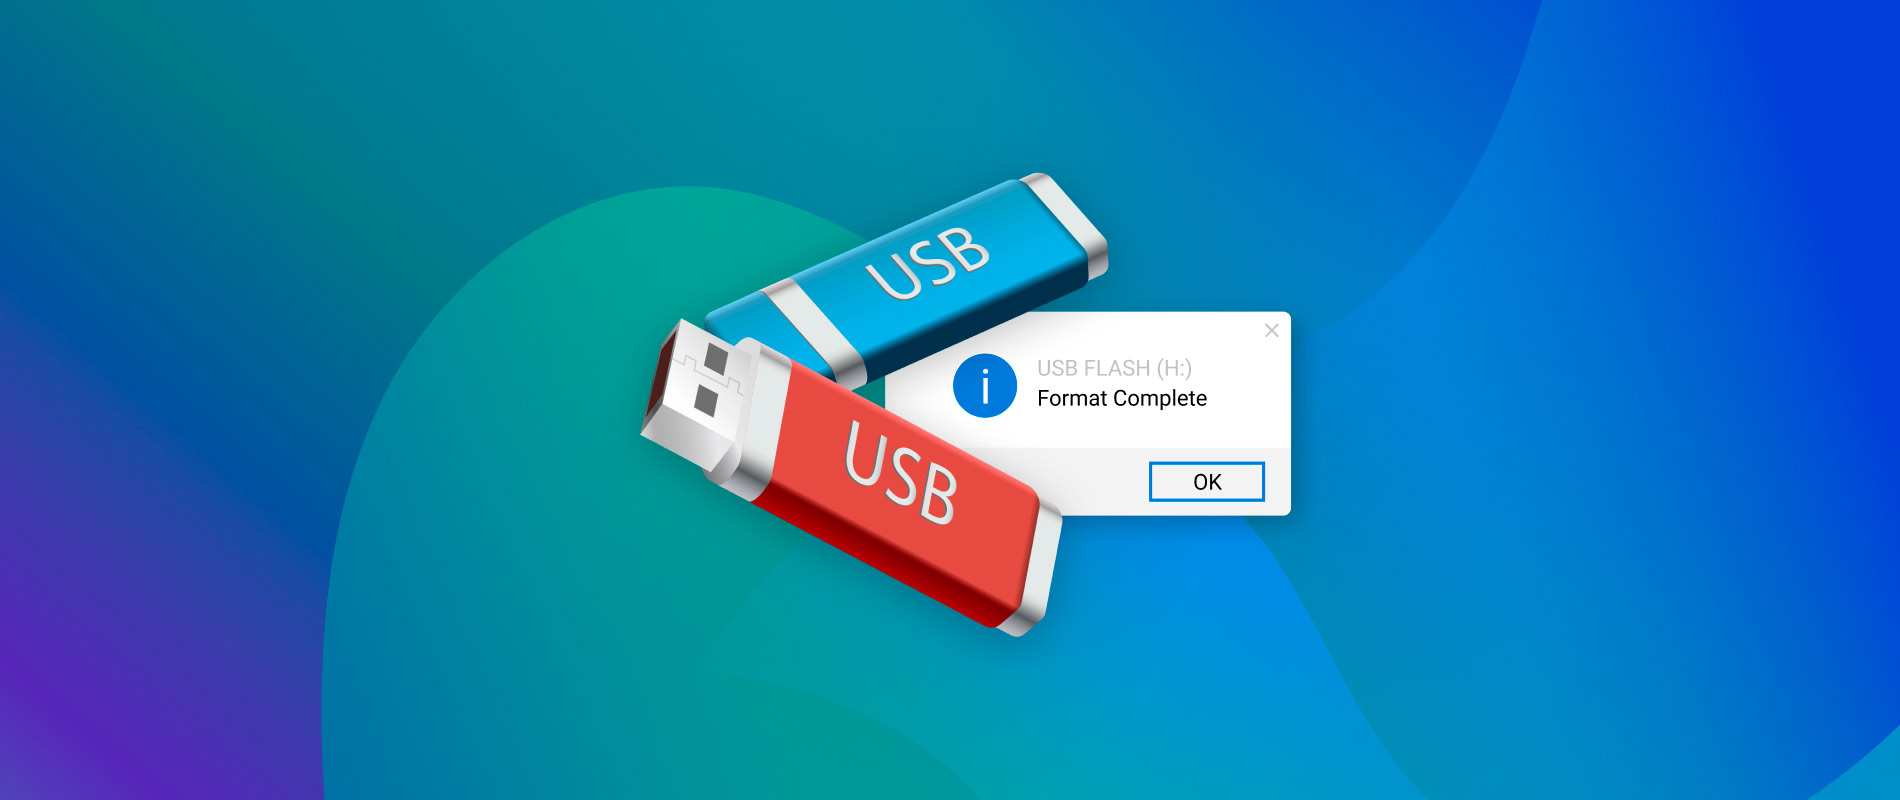 how to check when usb was last accessed